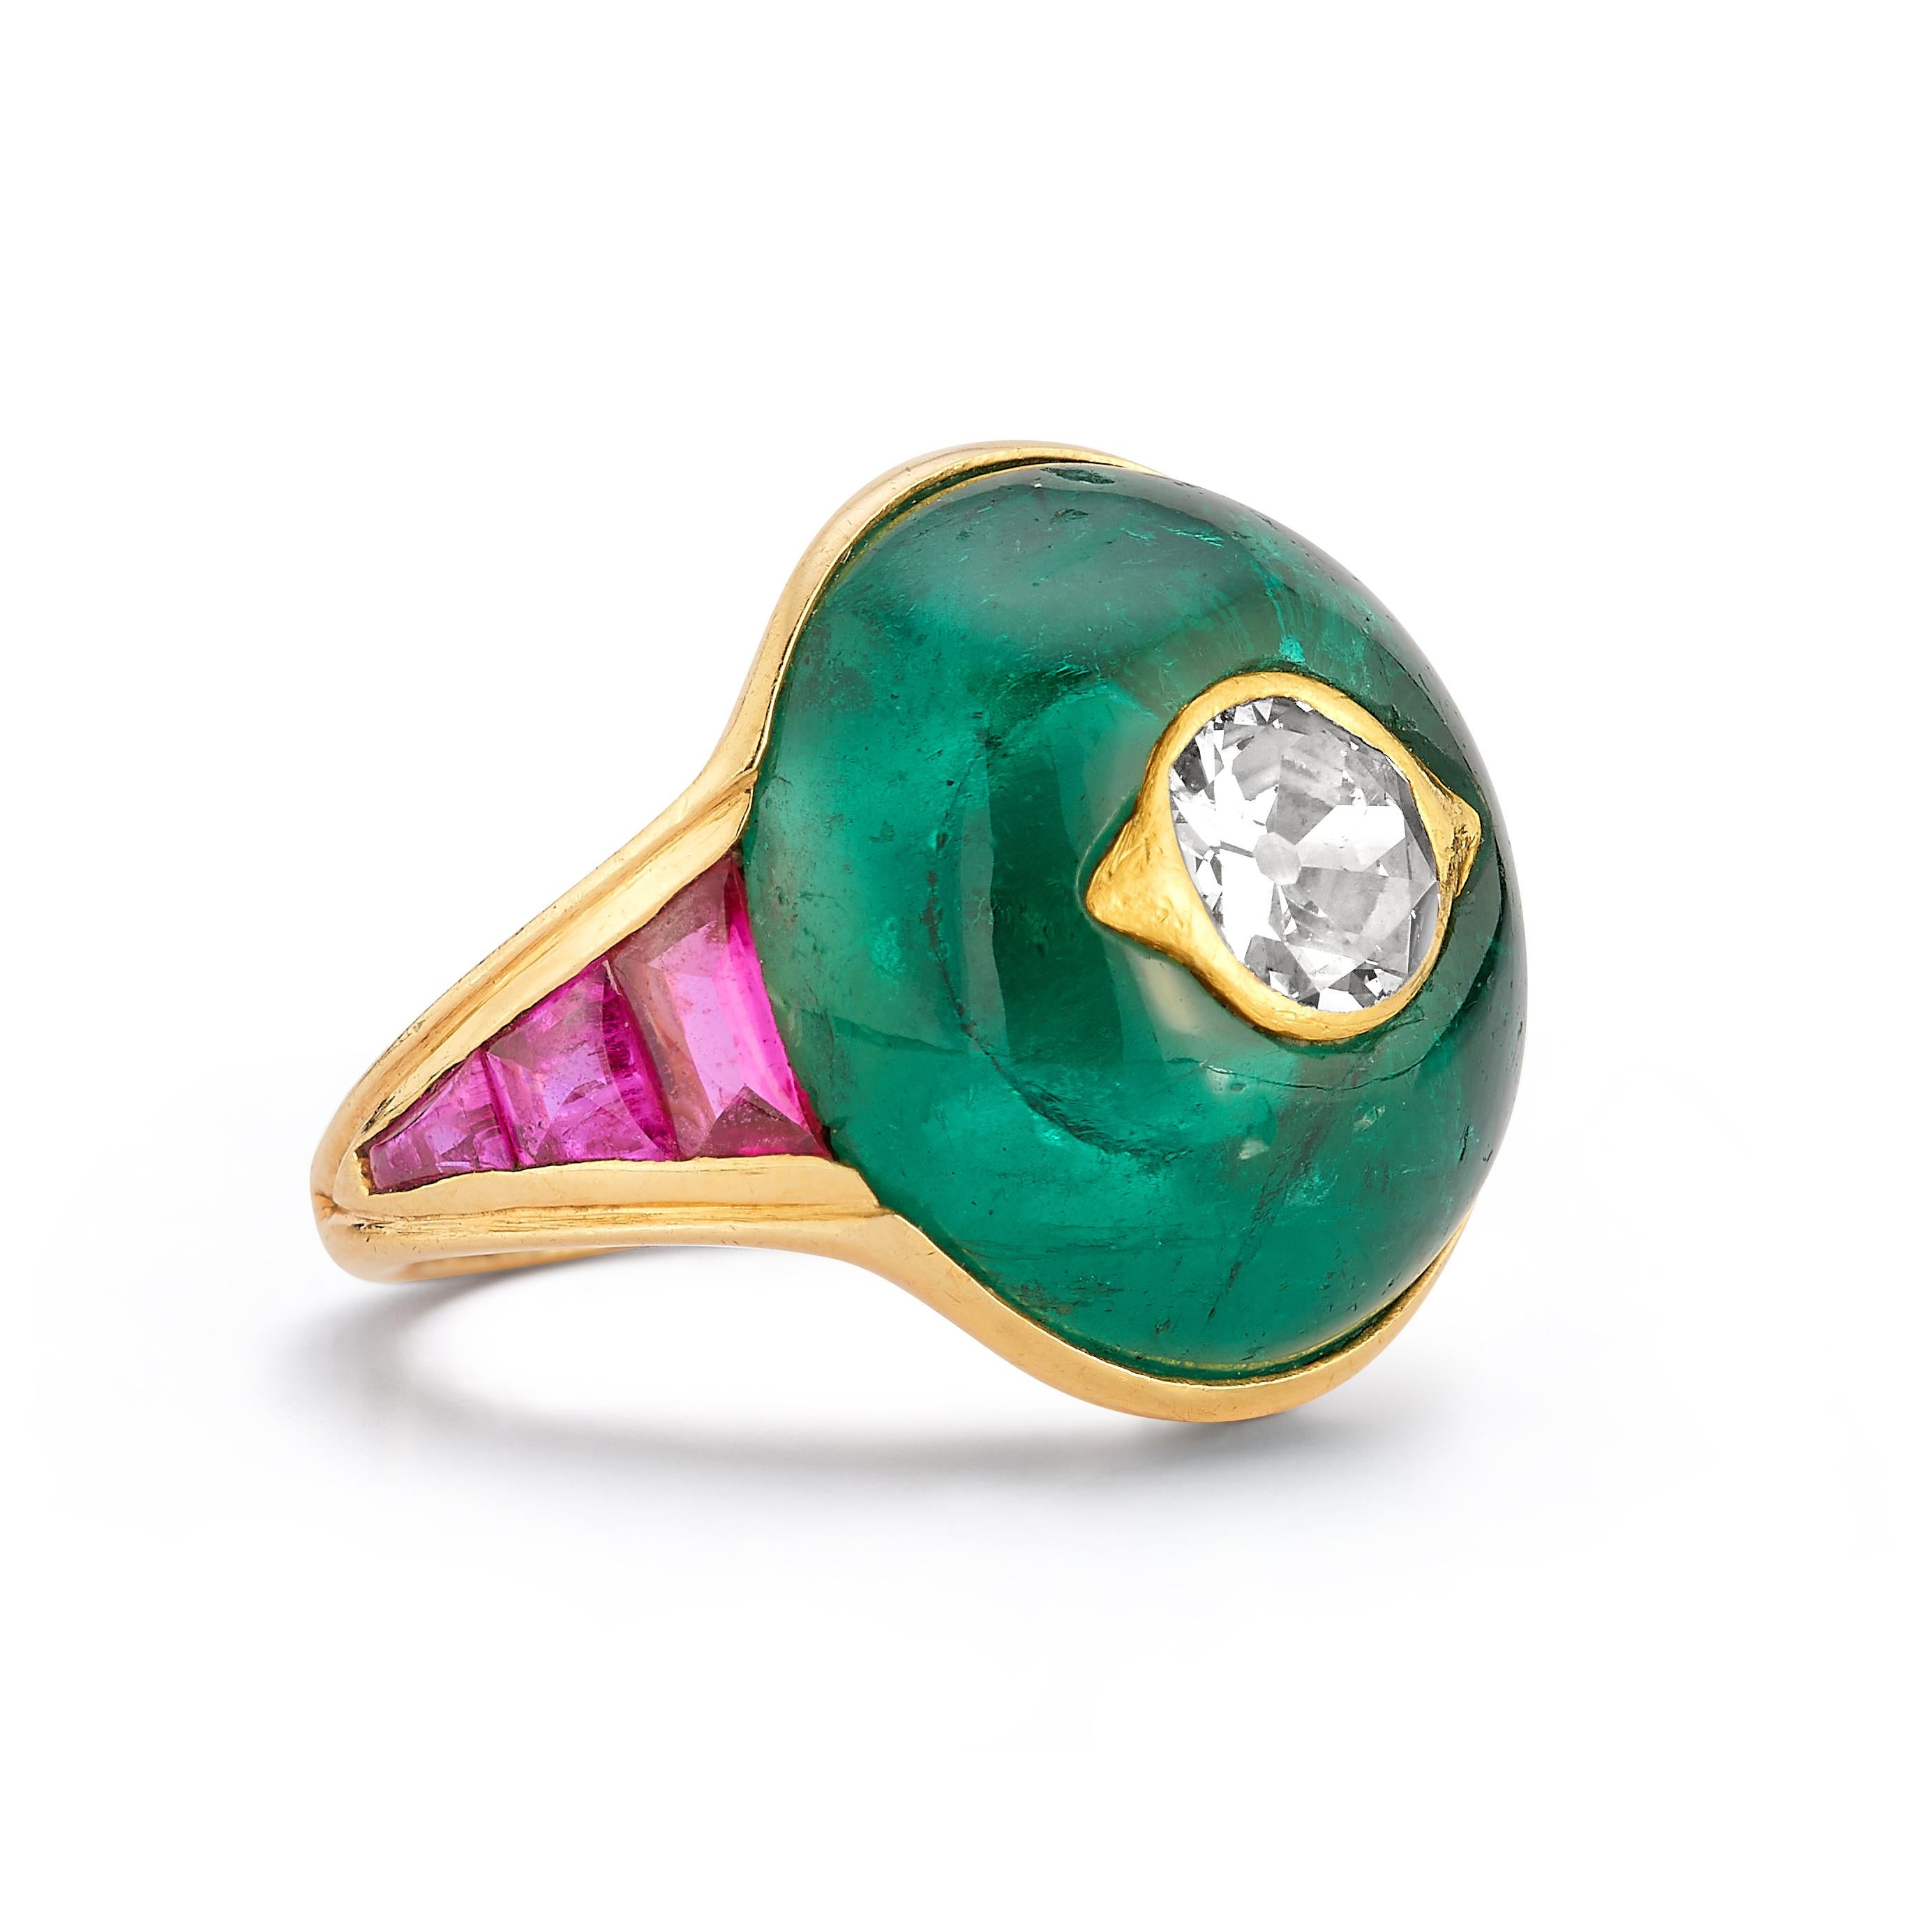 Diamond, Emerald, & Ruby Ring by JAR

An 18 karat yellow gold ring set with a central round cut diamond set inside  a cabochon emerald flanked by 6 buff top rubies 

Signed JAR Paris, maker's mark (Cristofol)

Ring Size: 3

Gross Weight: 8.6 grams